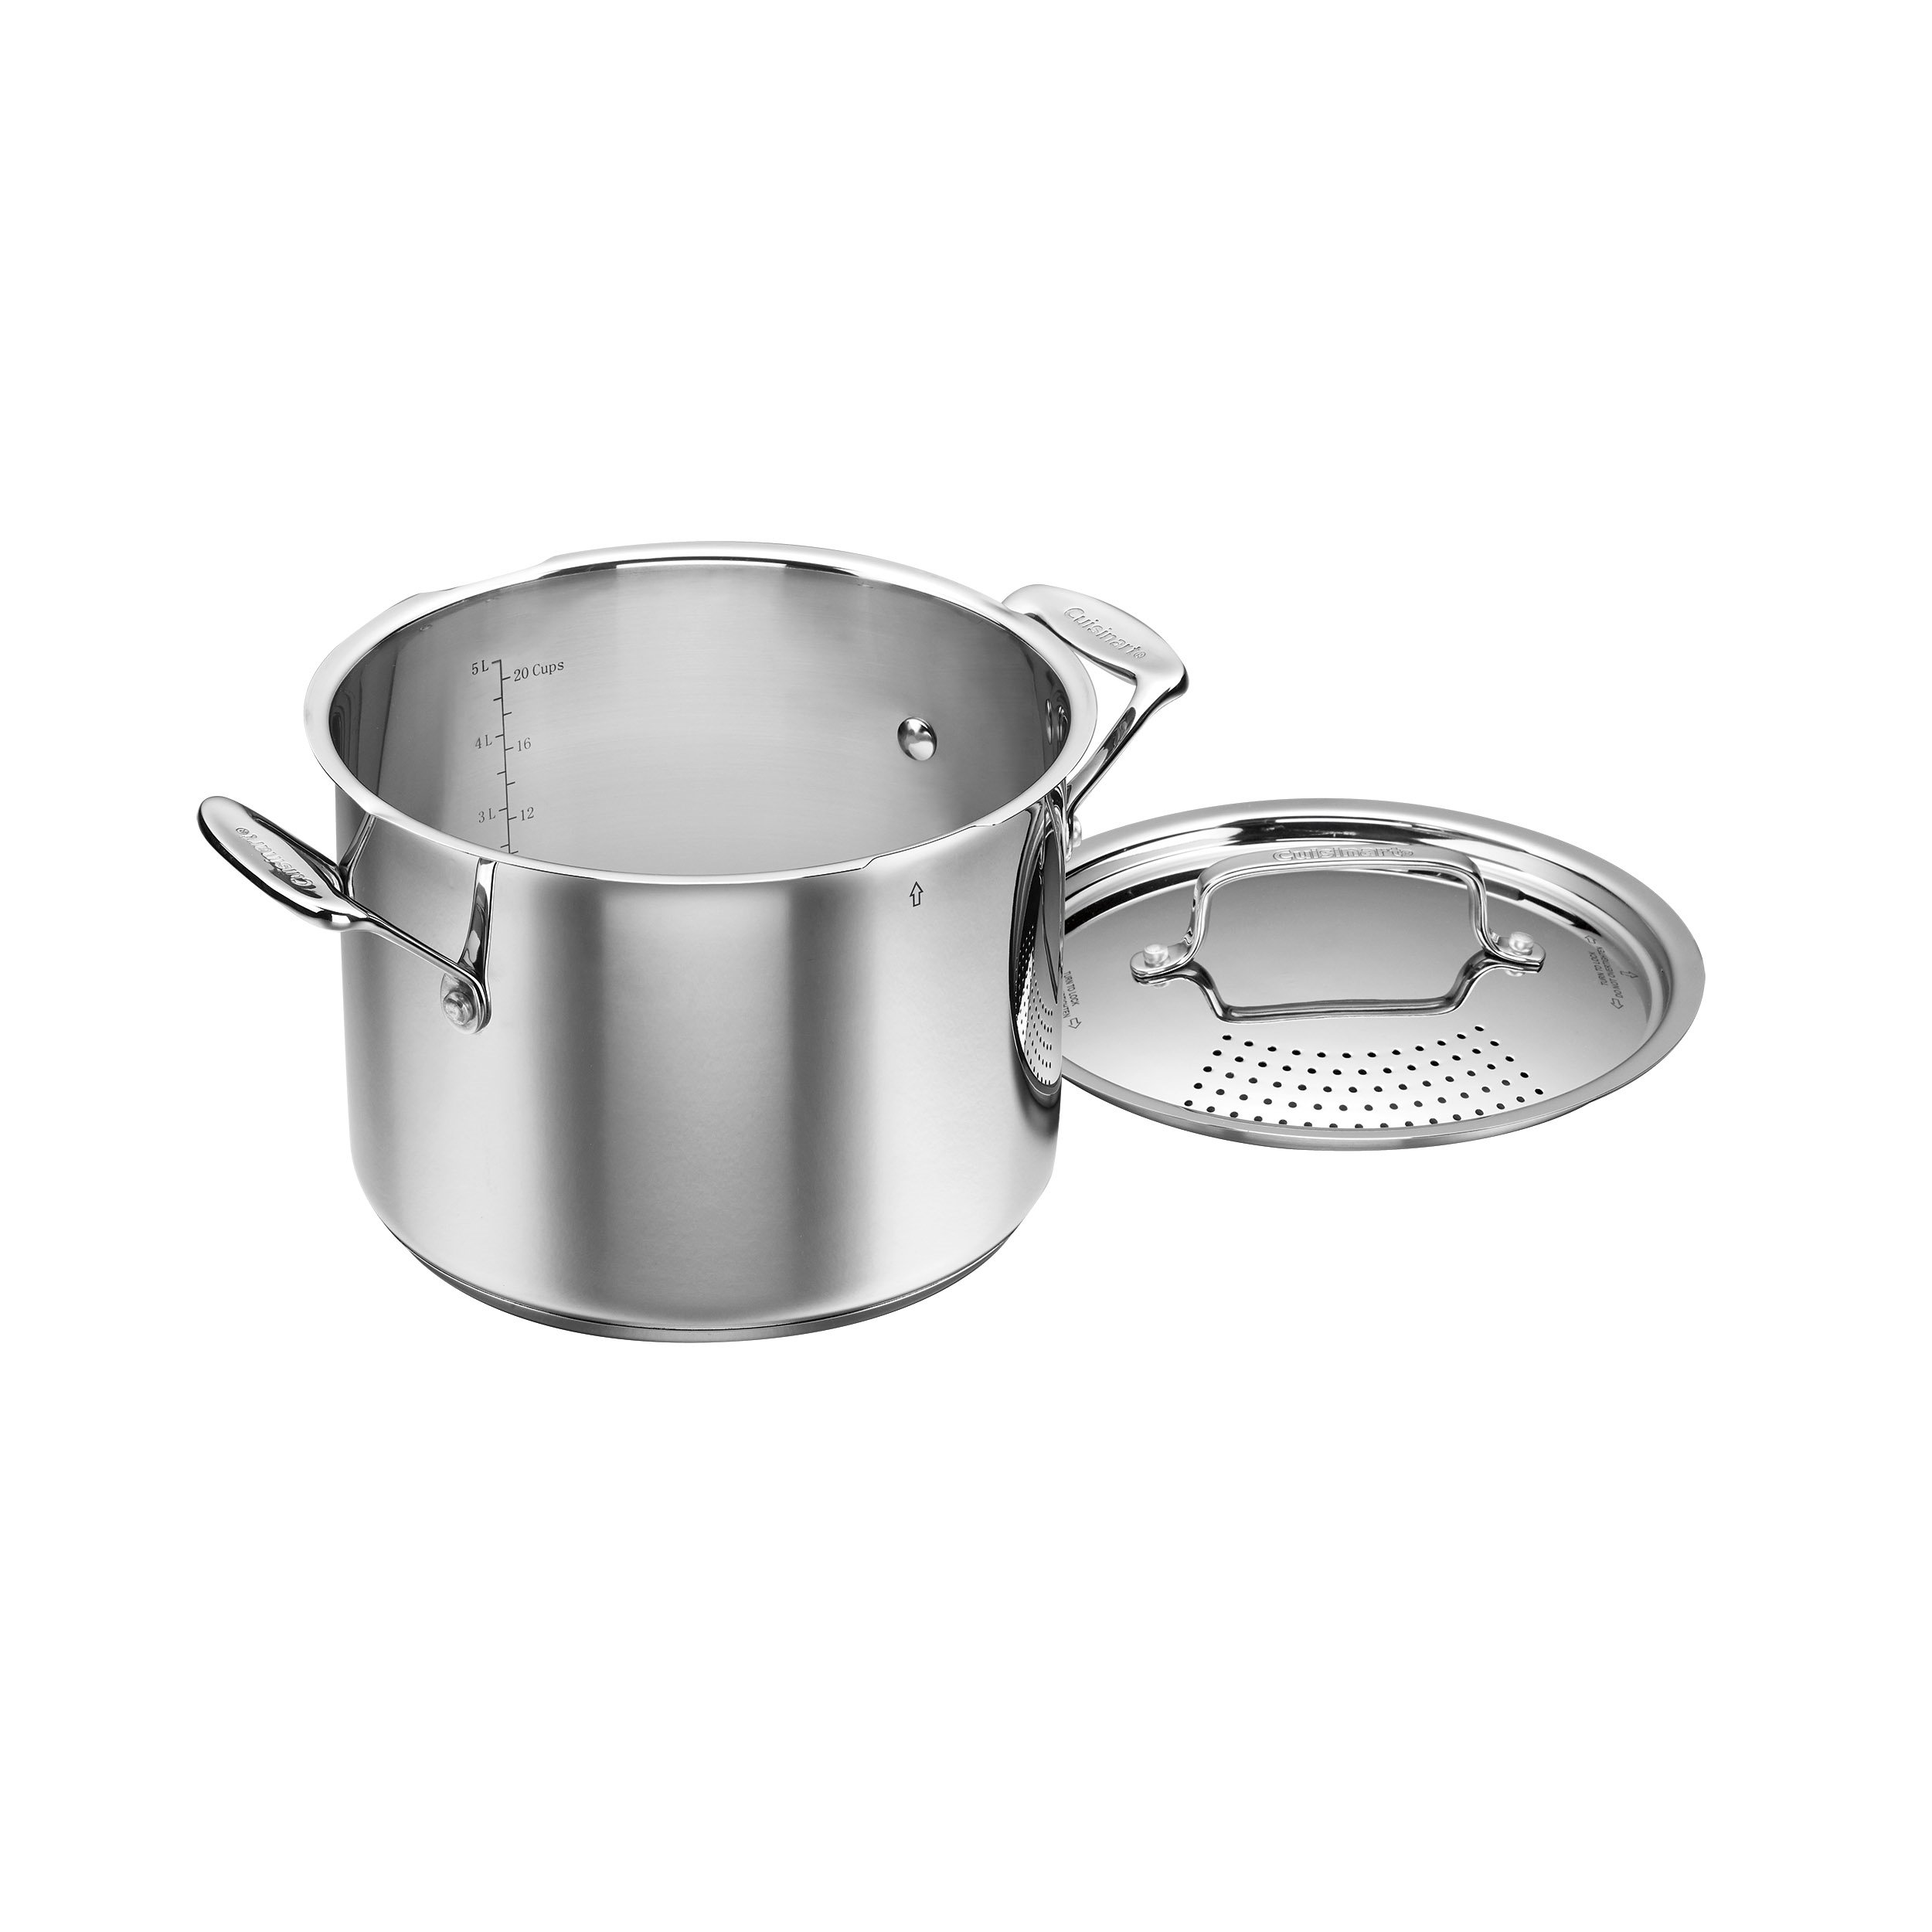 Cuisinart Chef's Classic Stainless 8 Quart Stockpot with Cover